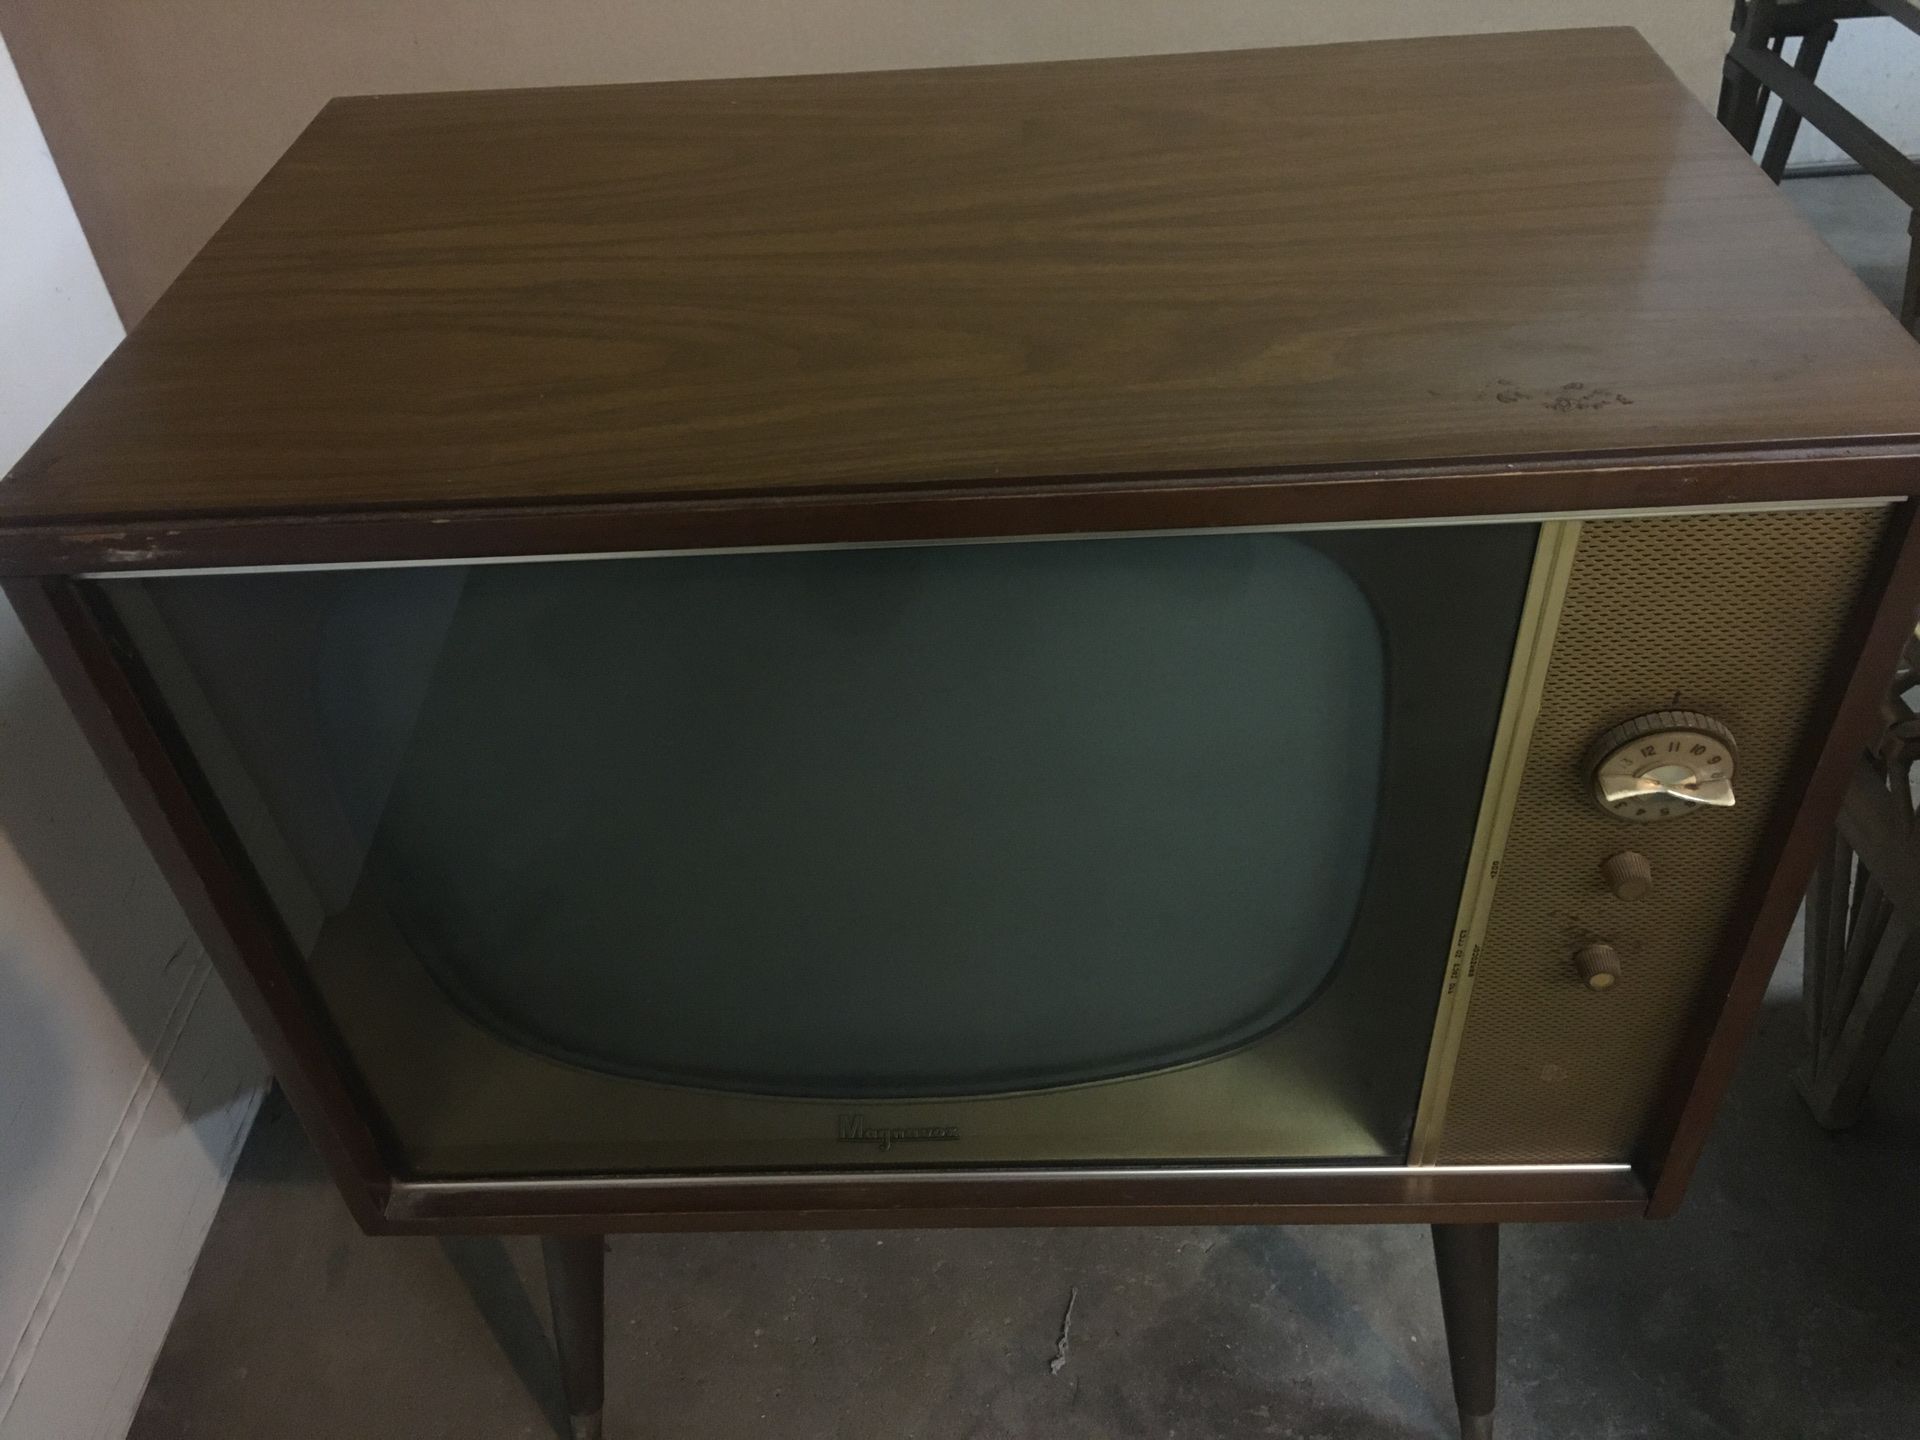 Vintage Magnavox TV tube light up no picture could be using shipment or decorated item $25